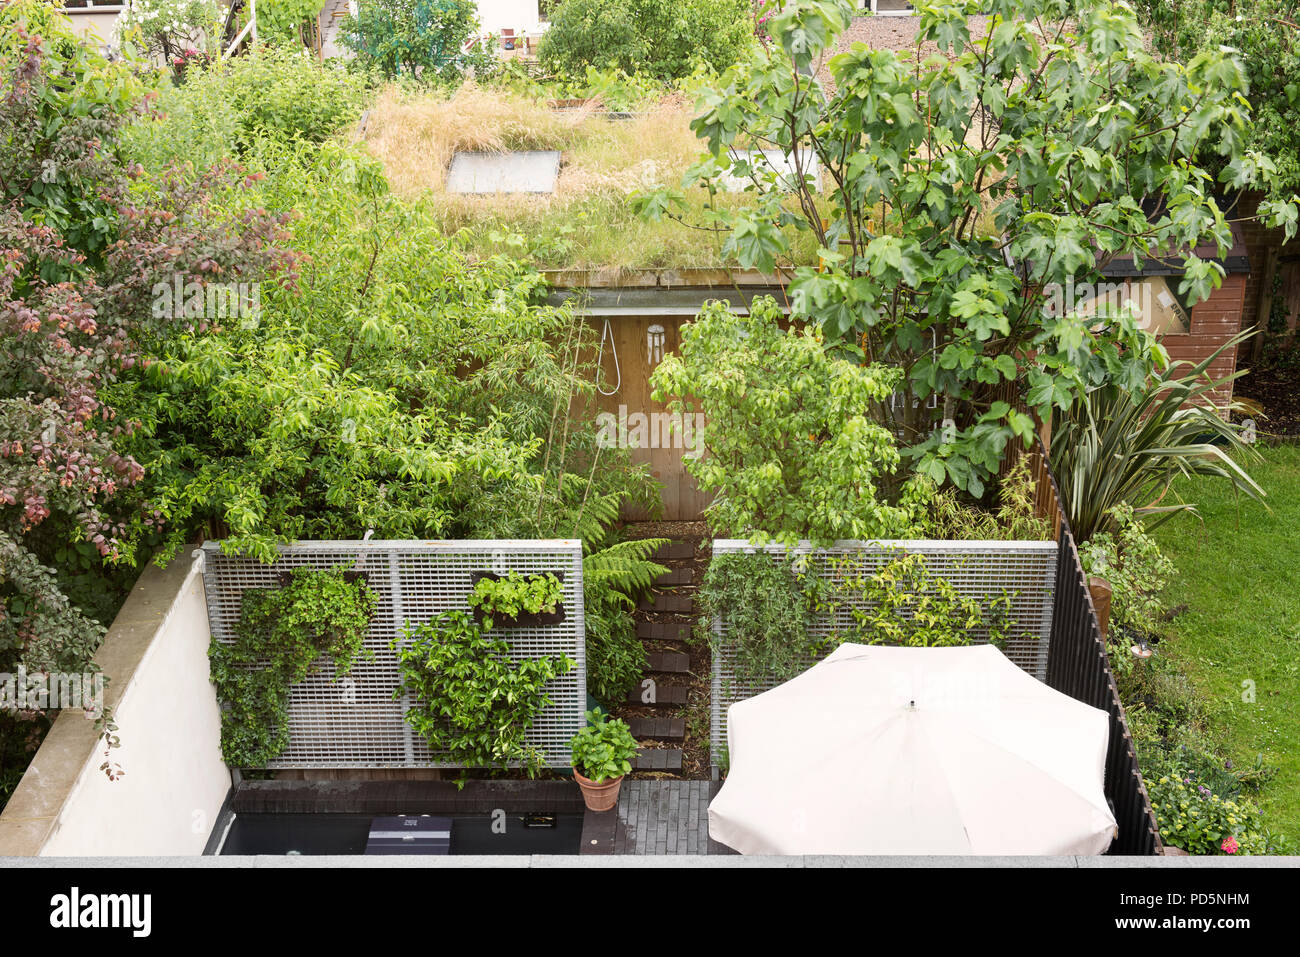 Elevated view of garden patio area and outhouse with grass roof Stock Photo